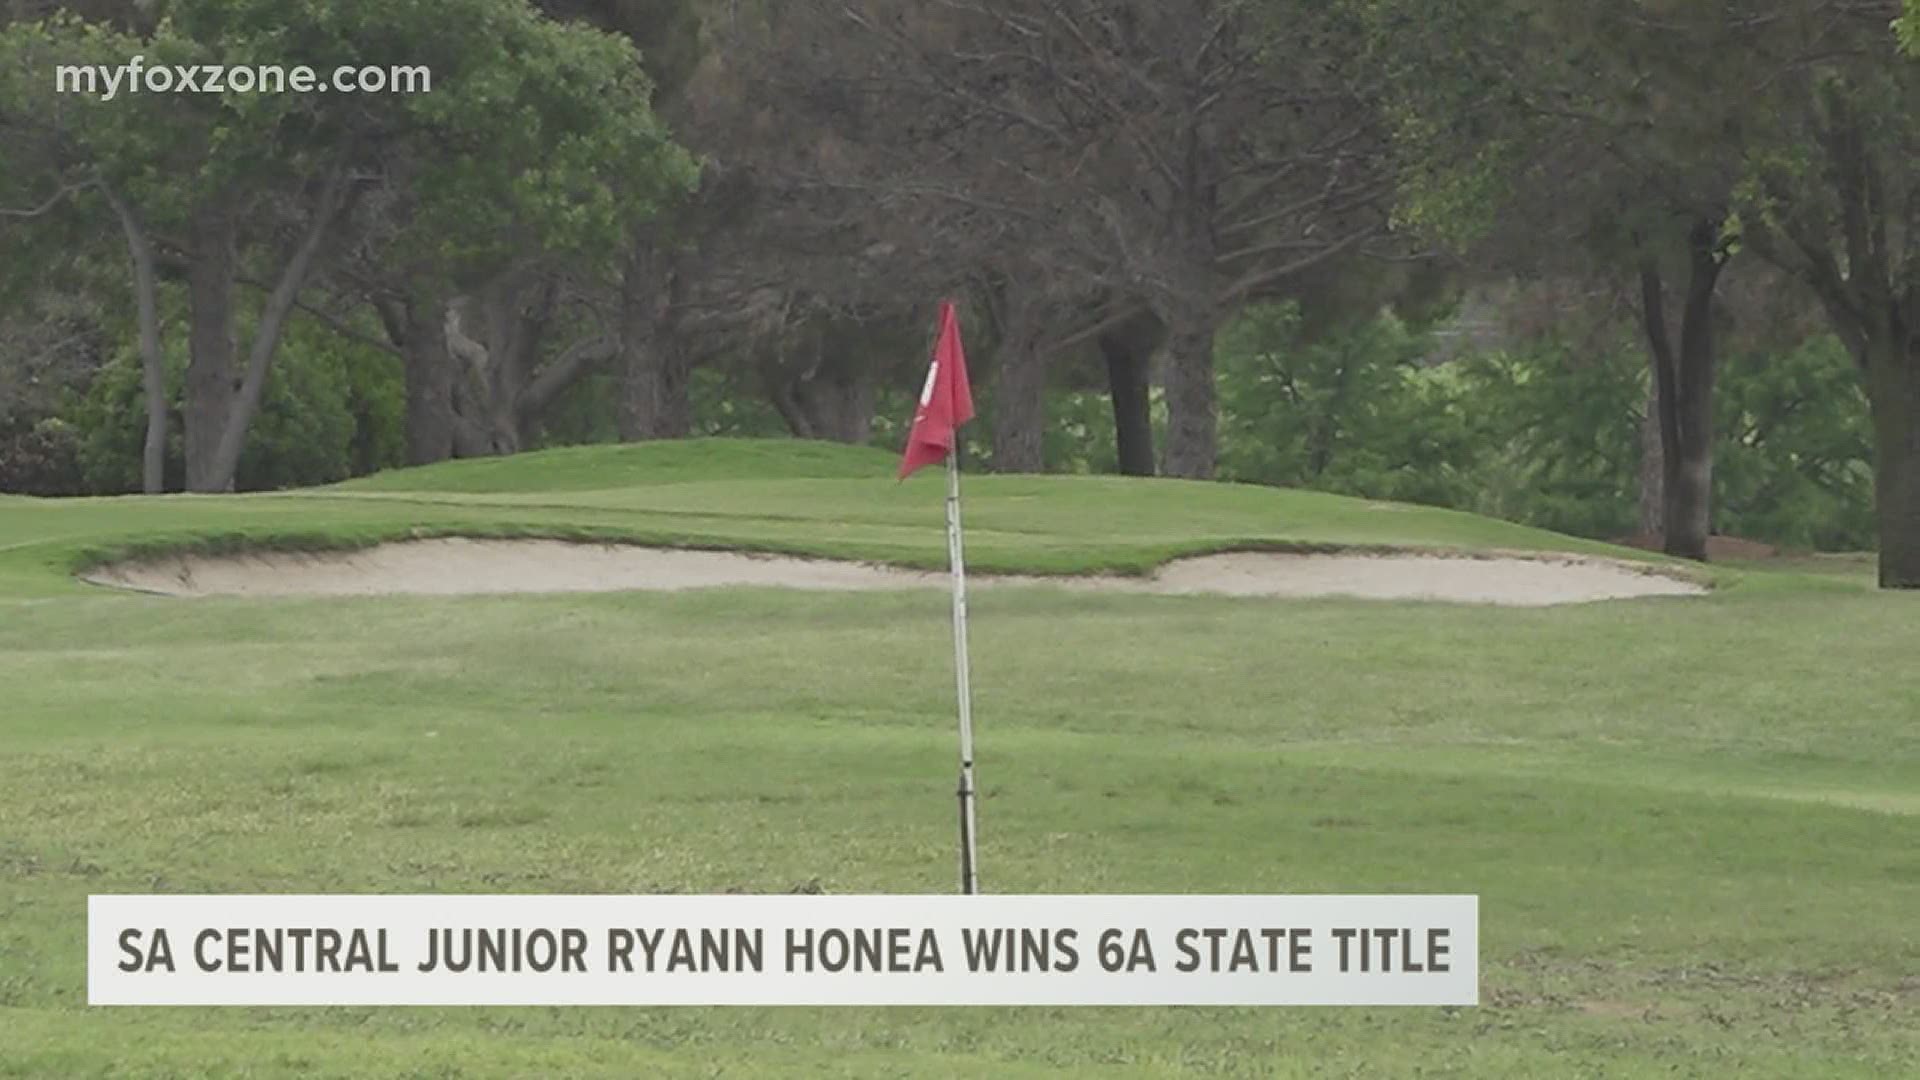 Ryann Honea is the first Lady Cats golfer to win a state title since Julie McMahon in 1995.